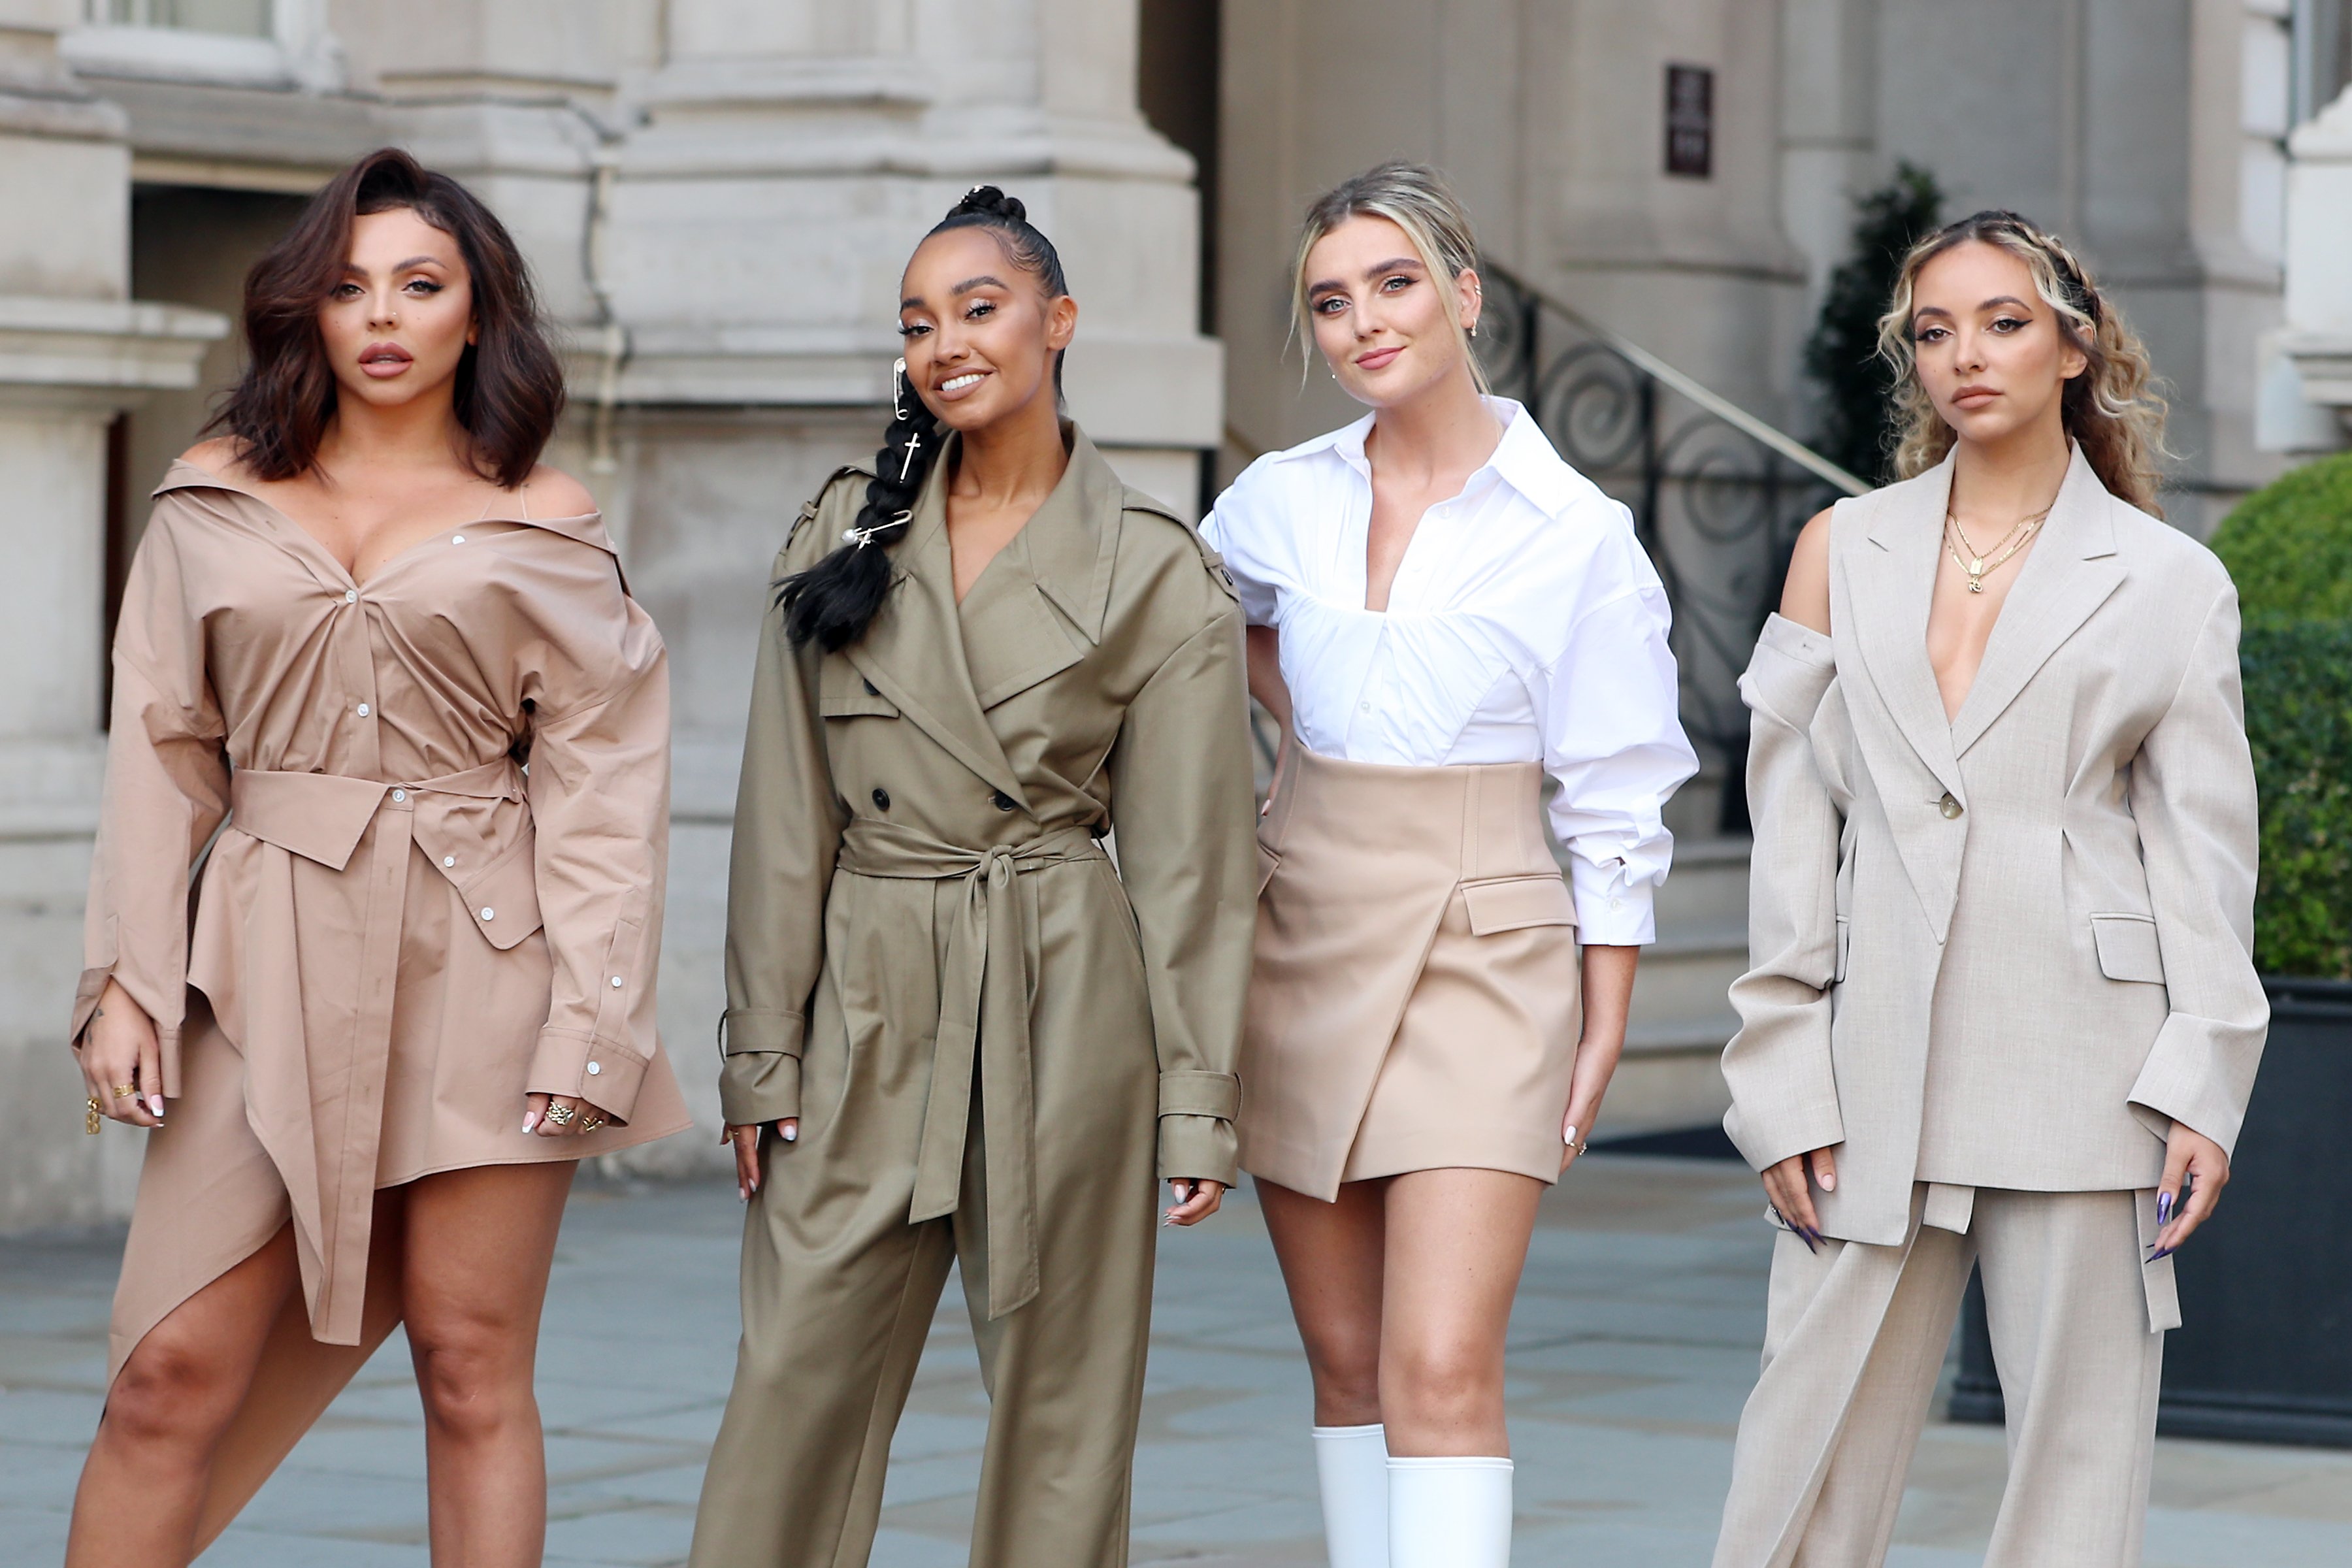 Little Mix band members leaving the Langham Hotel for their performance at BBC Radio One Live Lounge, London, 2020 | Photo: Getty Images 